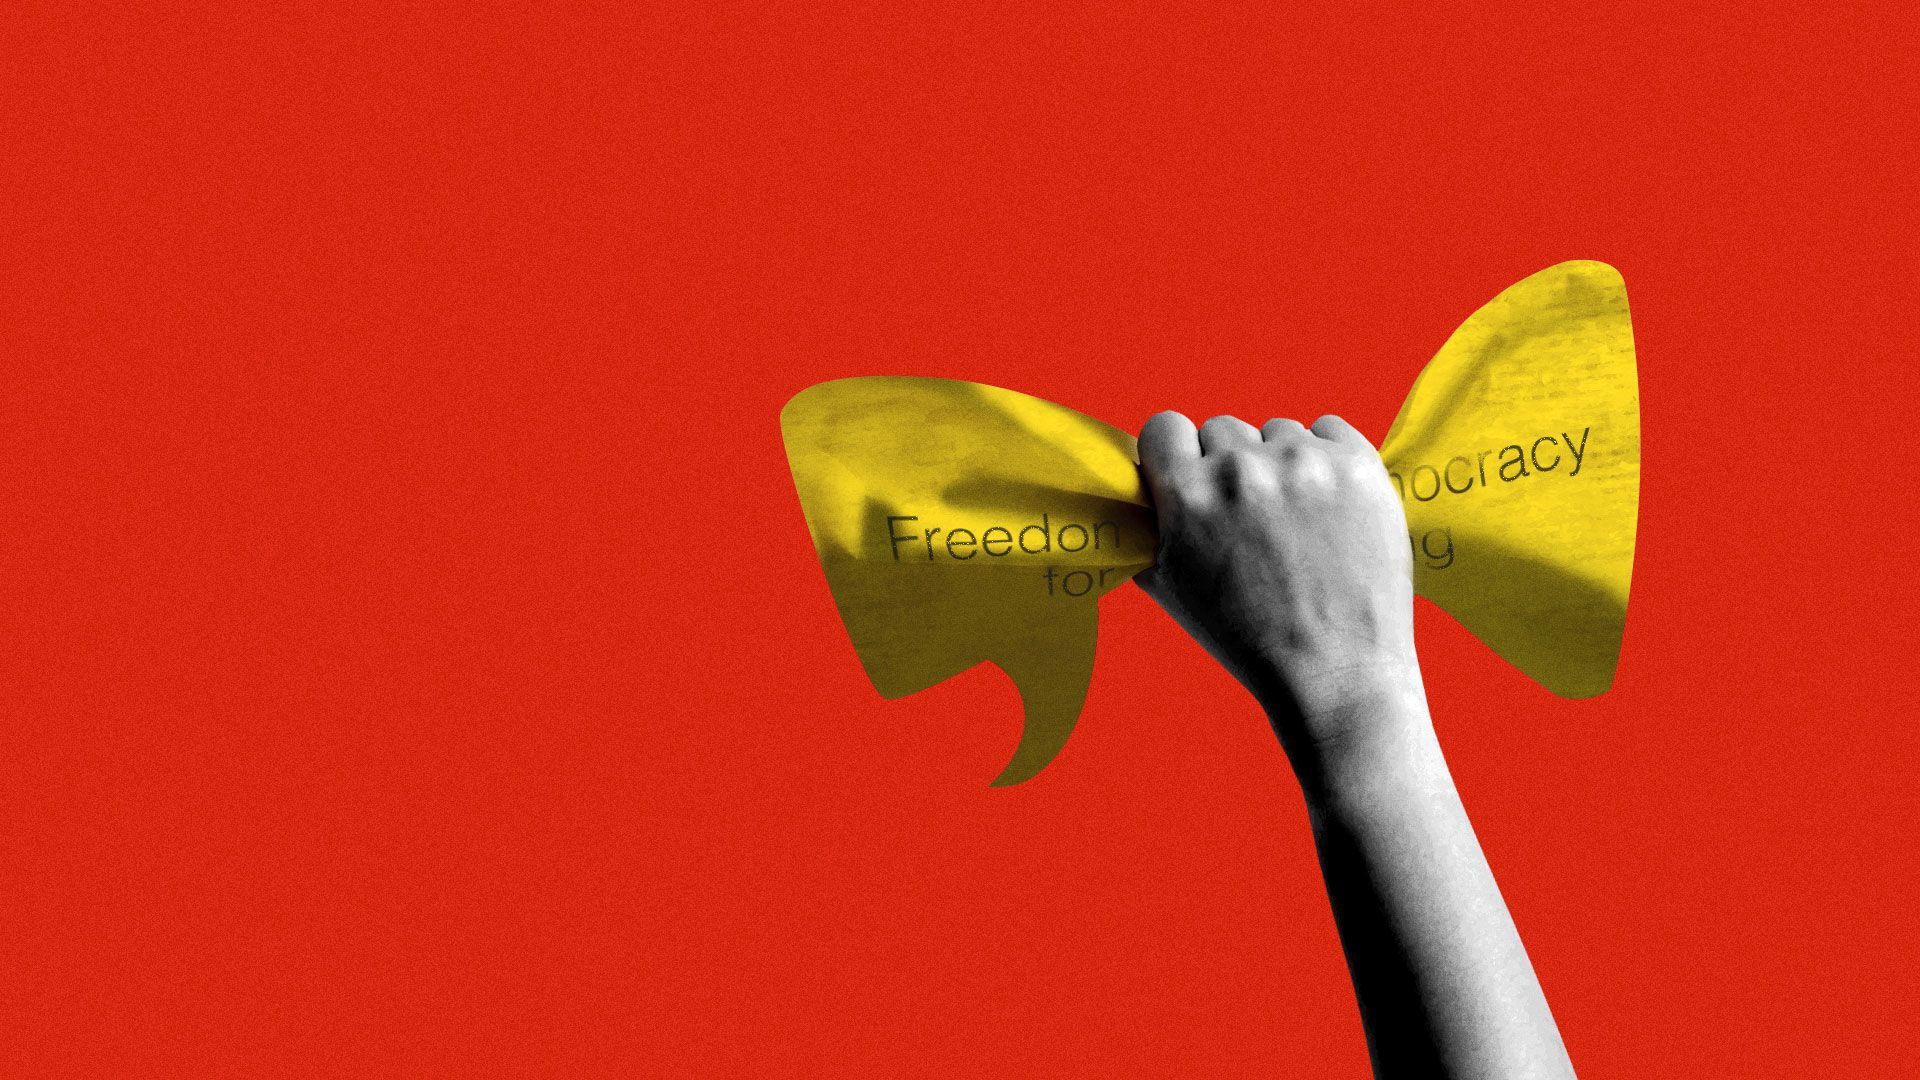 Illustration of hand crushing a speech bubble with “Freedom and democracy for Hong Kong”